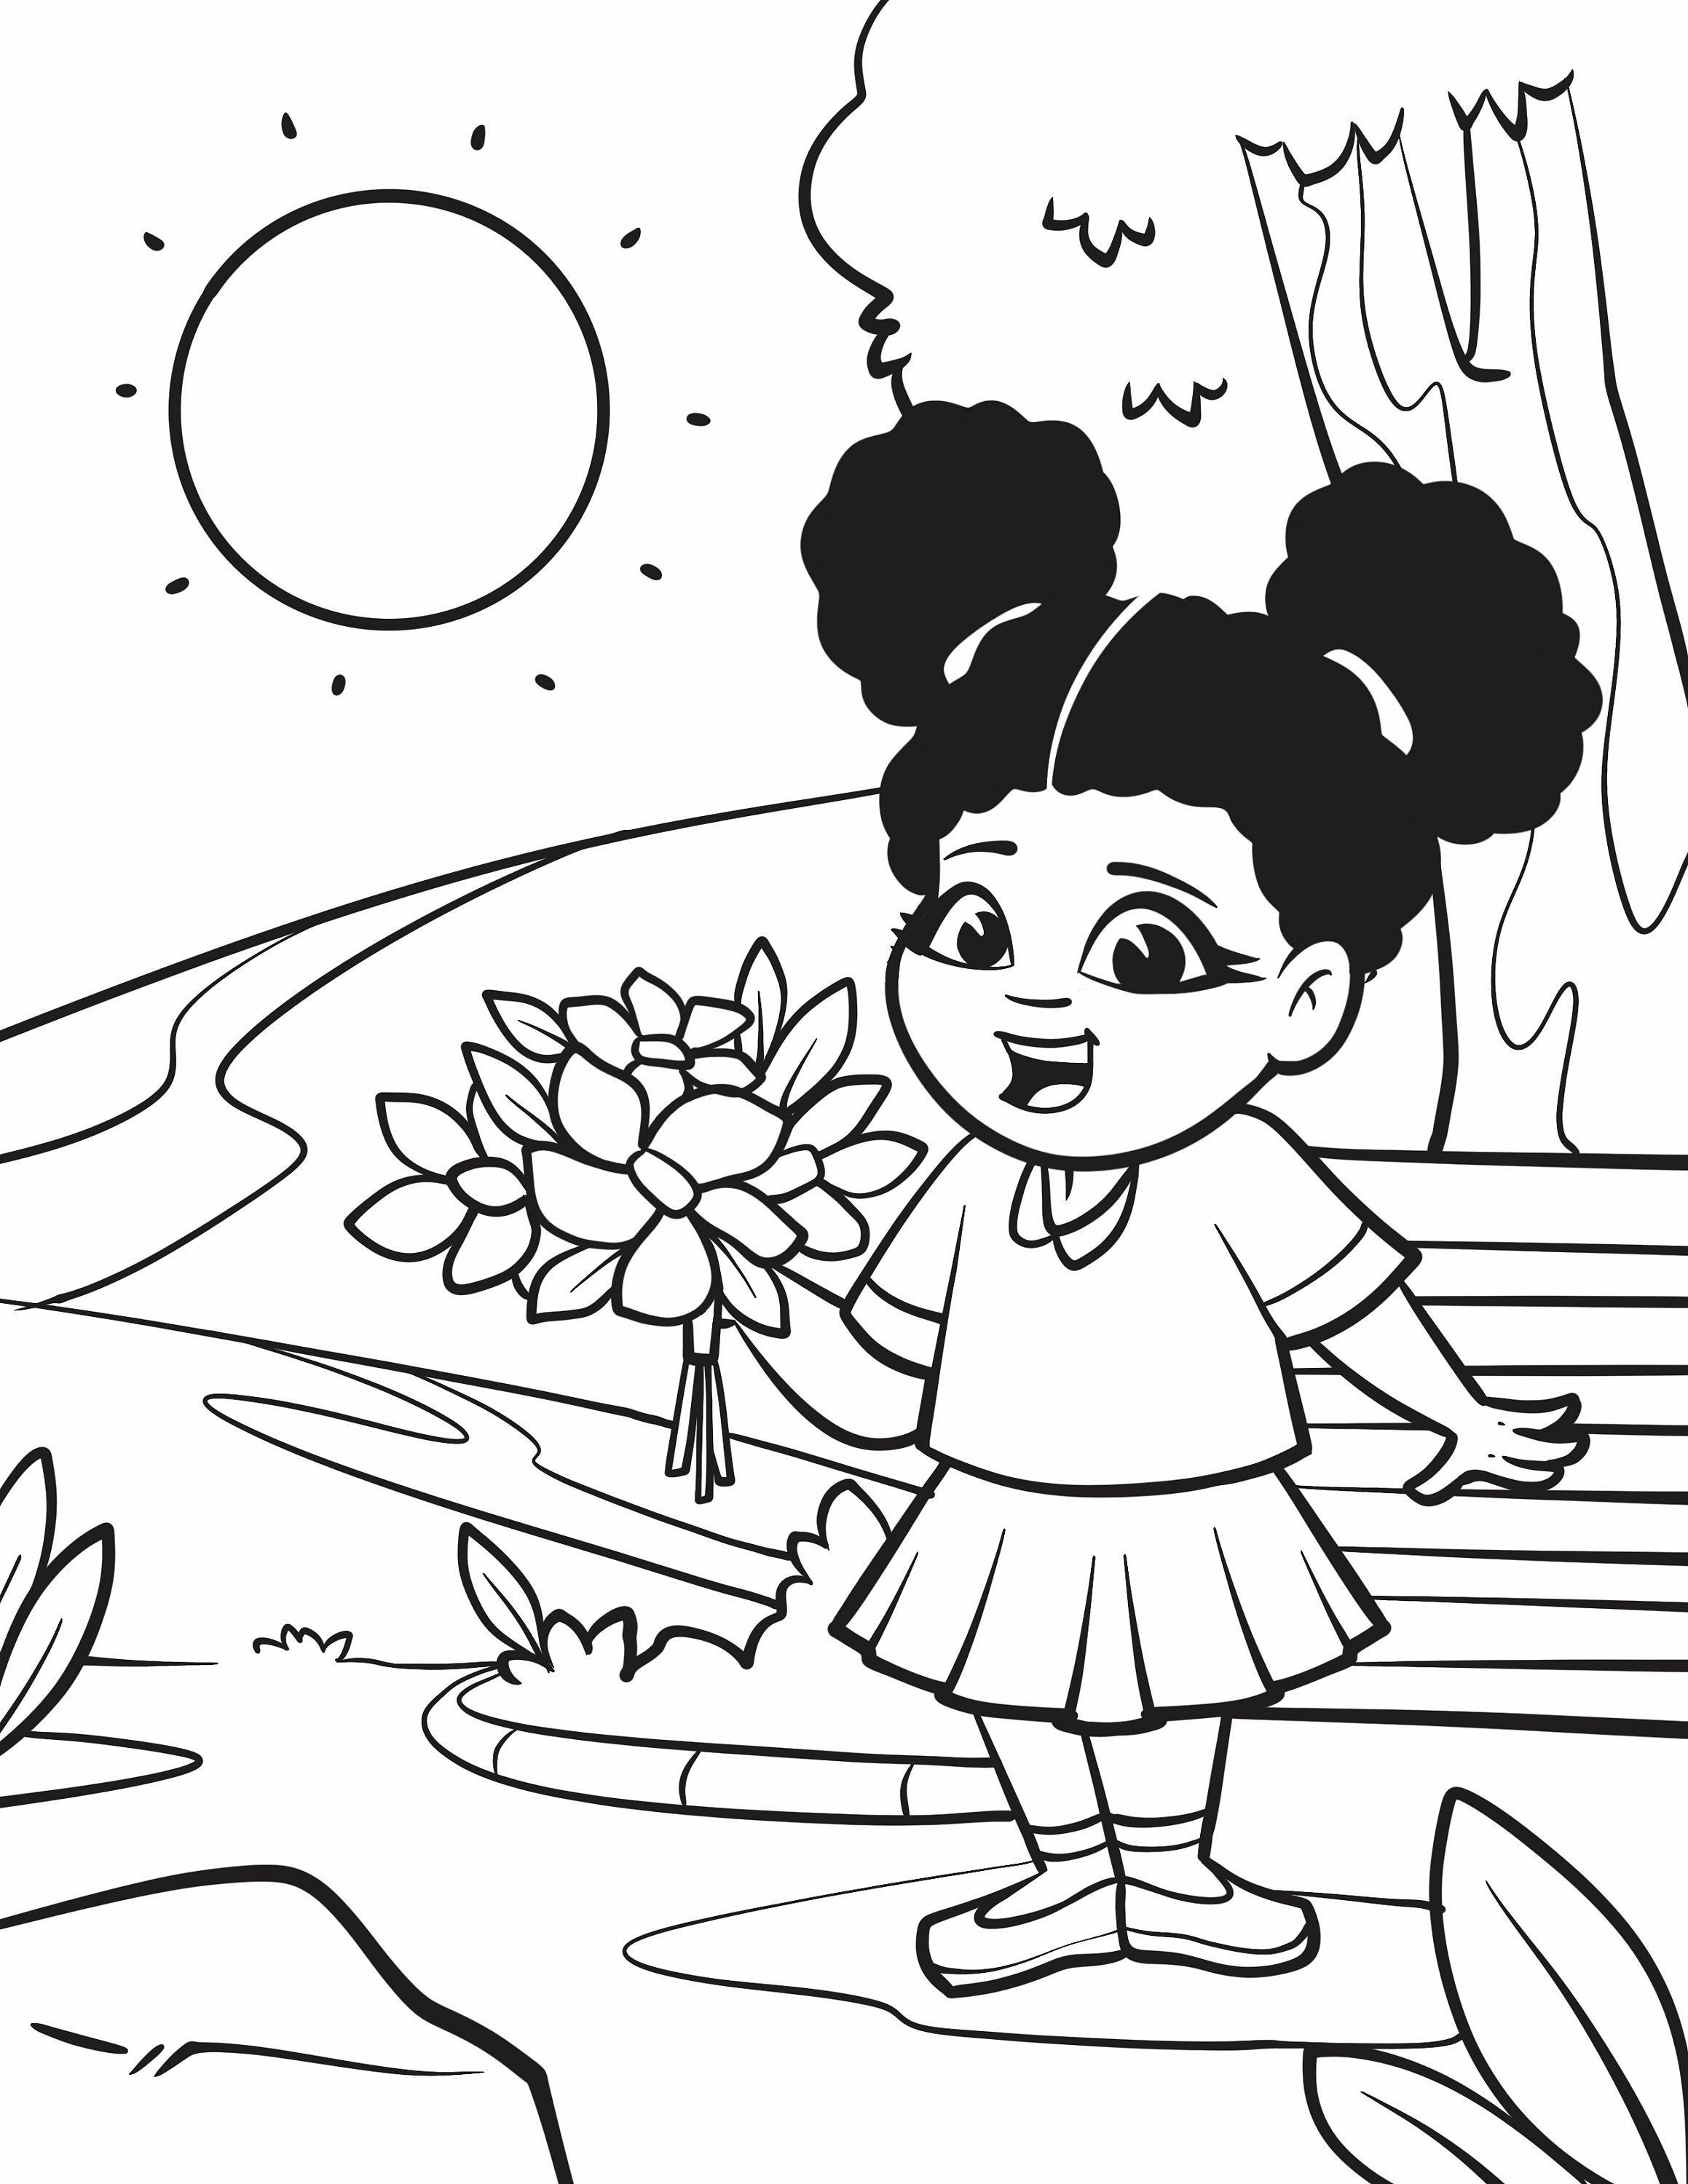 African American Children Coloring Pages